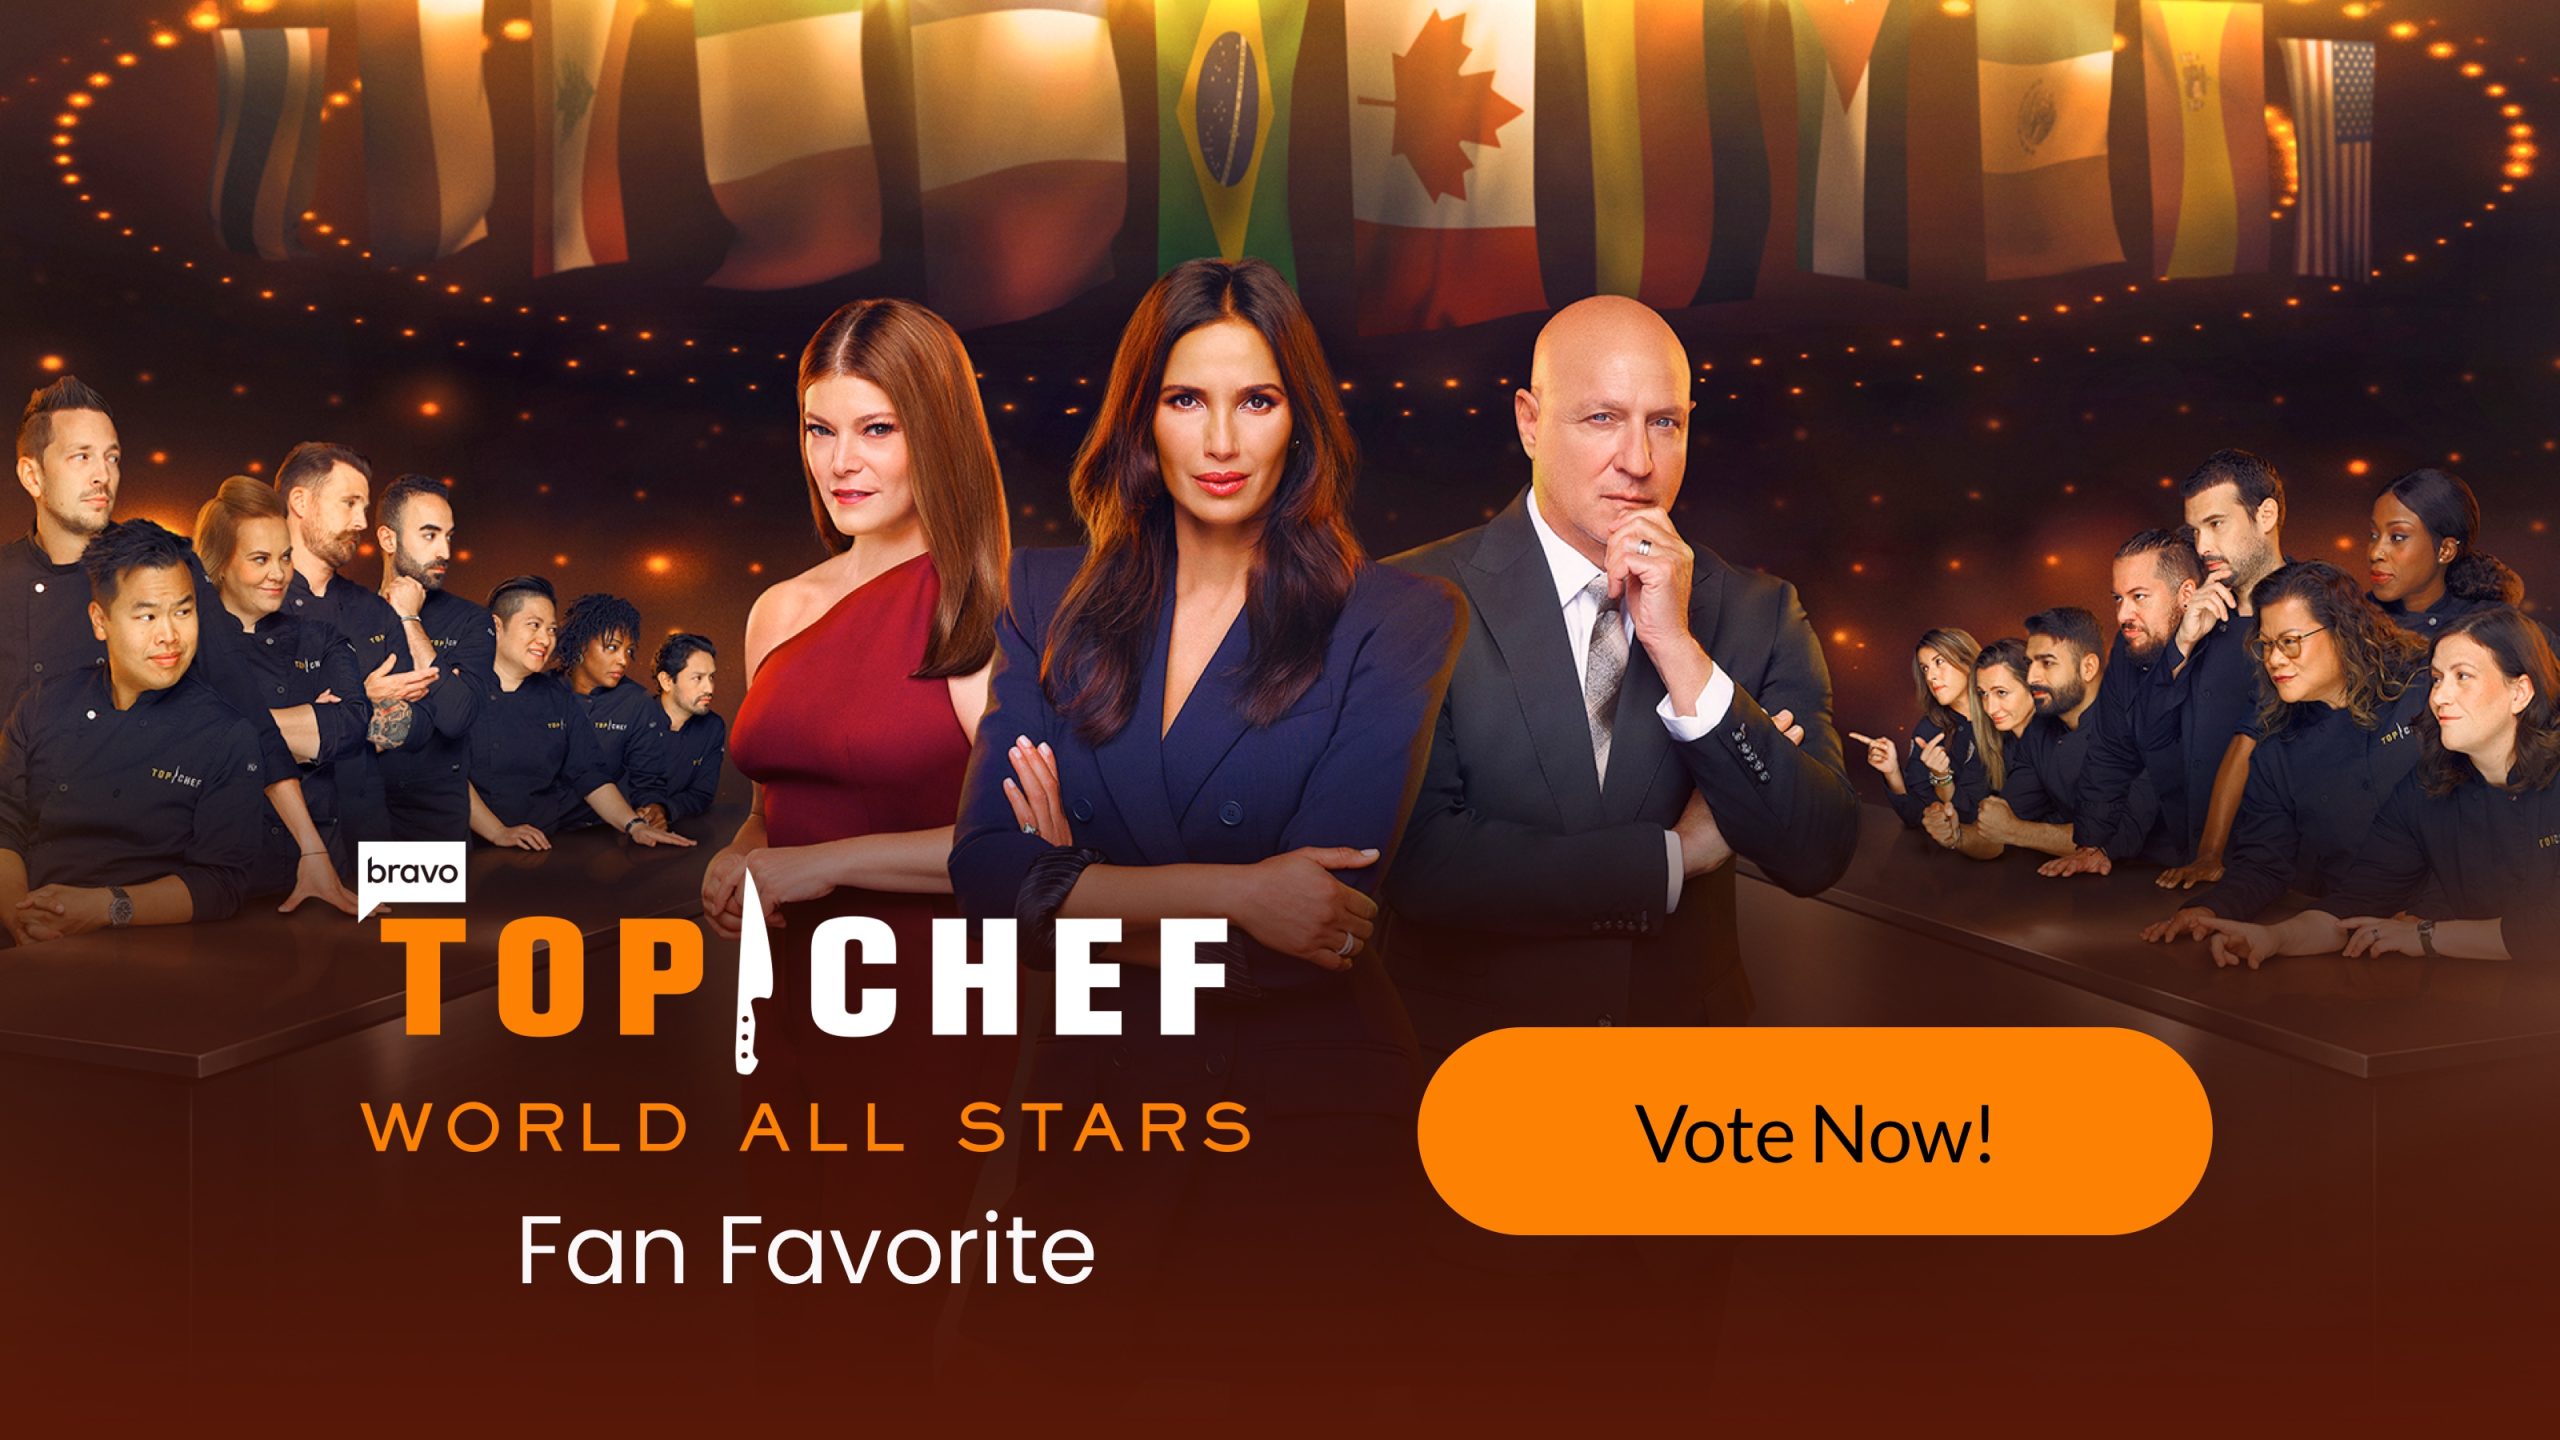 Top Chef Fan Favorite Season 20: Who Will Win $10K Prize? Cast Your Vote Now! 11